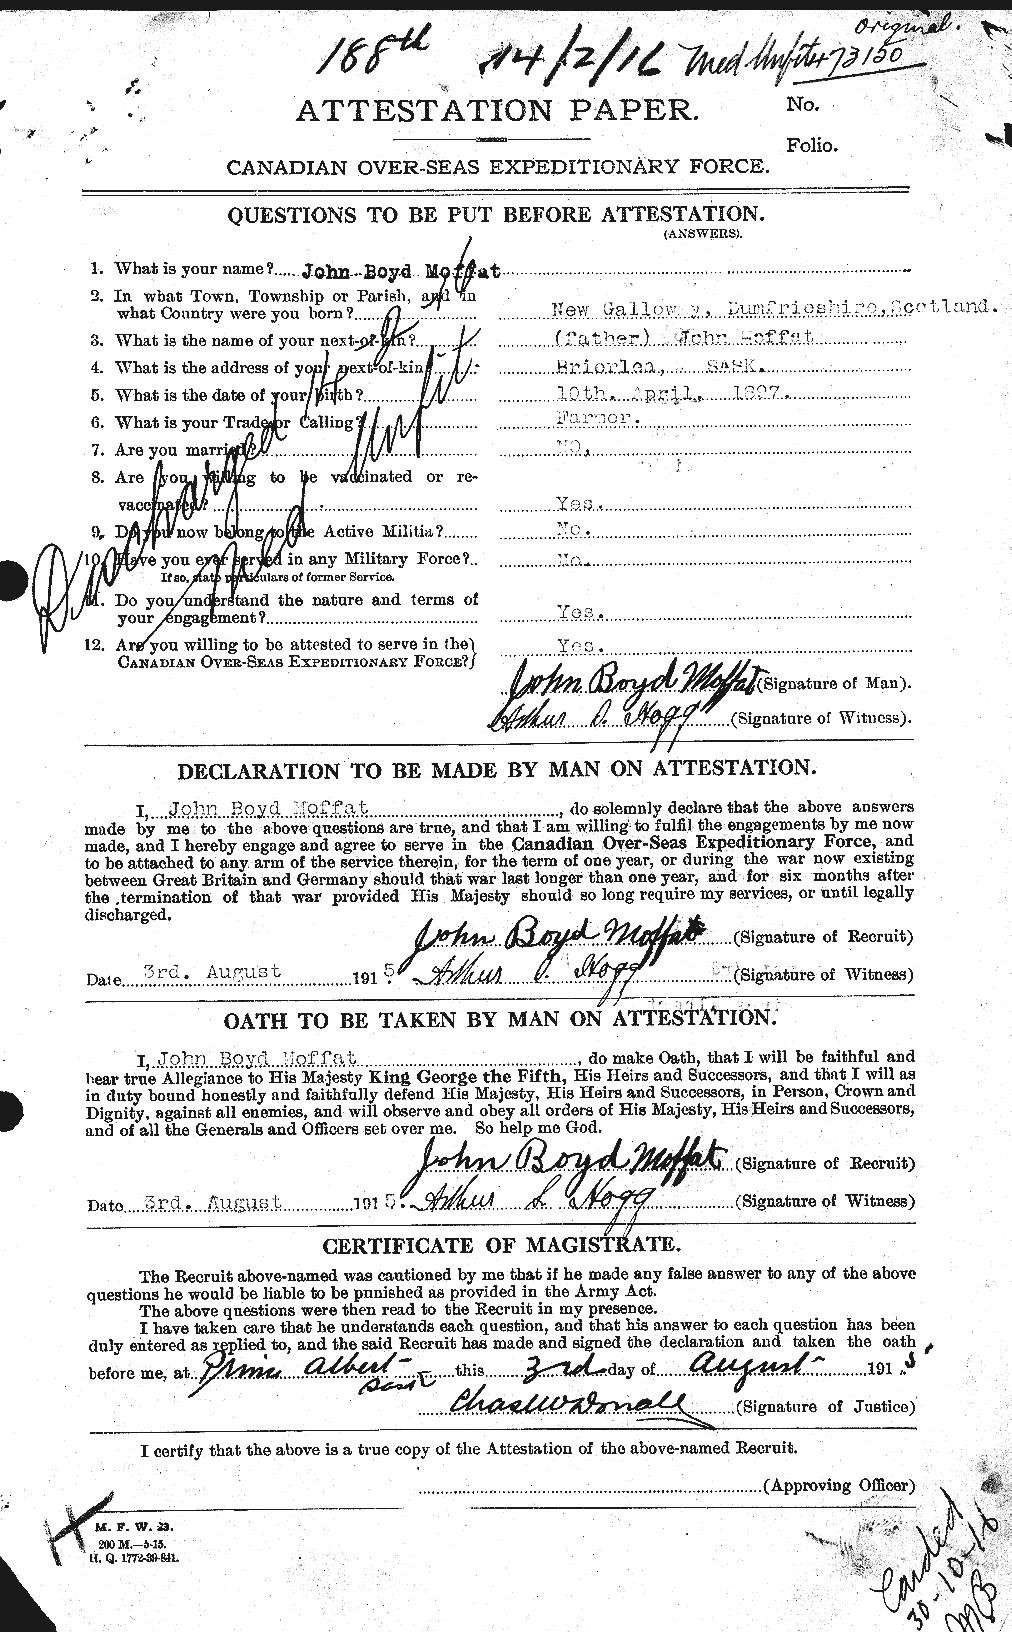 Personnel Records of the First World War - CEF 499047a